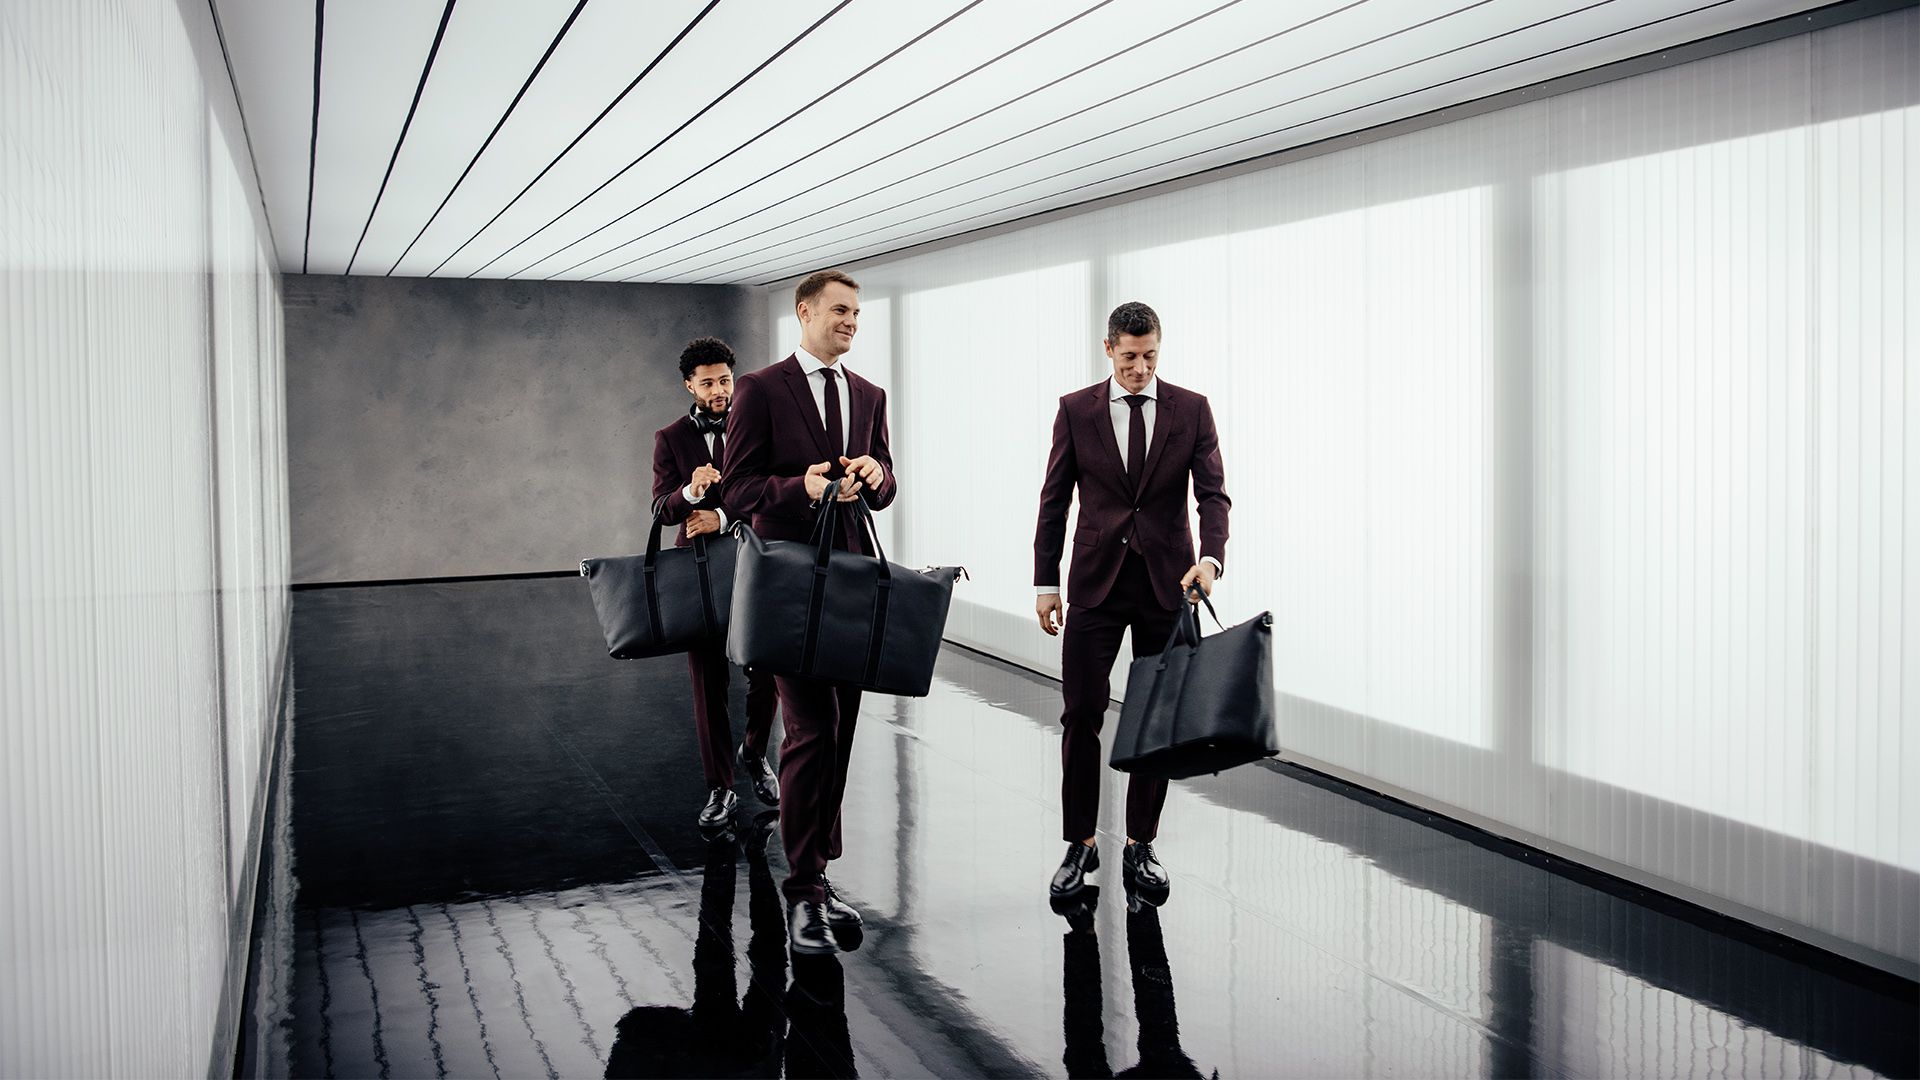 Dressed in lounge suits, the three professional footballers stride down a passageway.